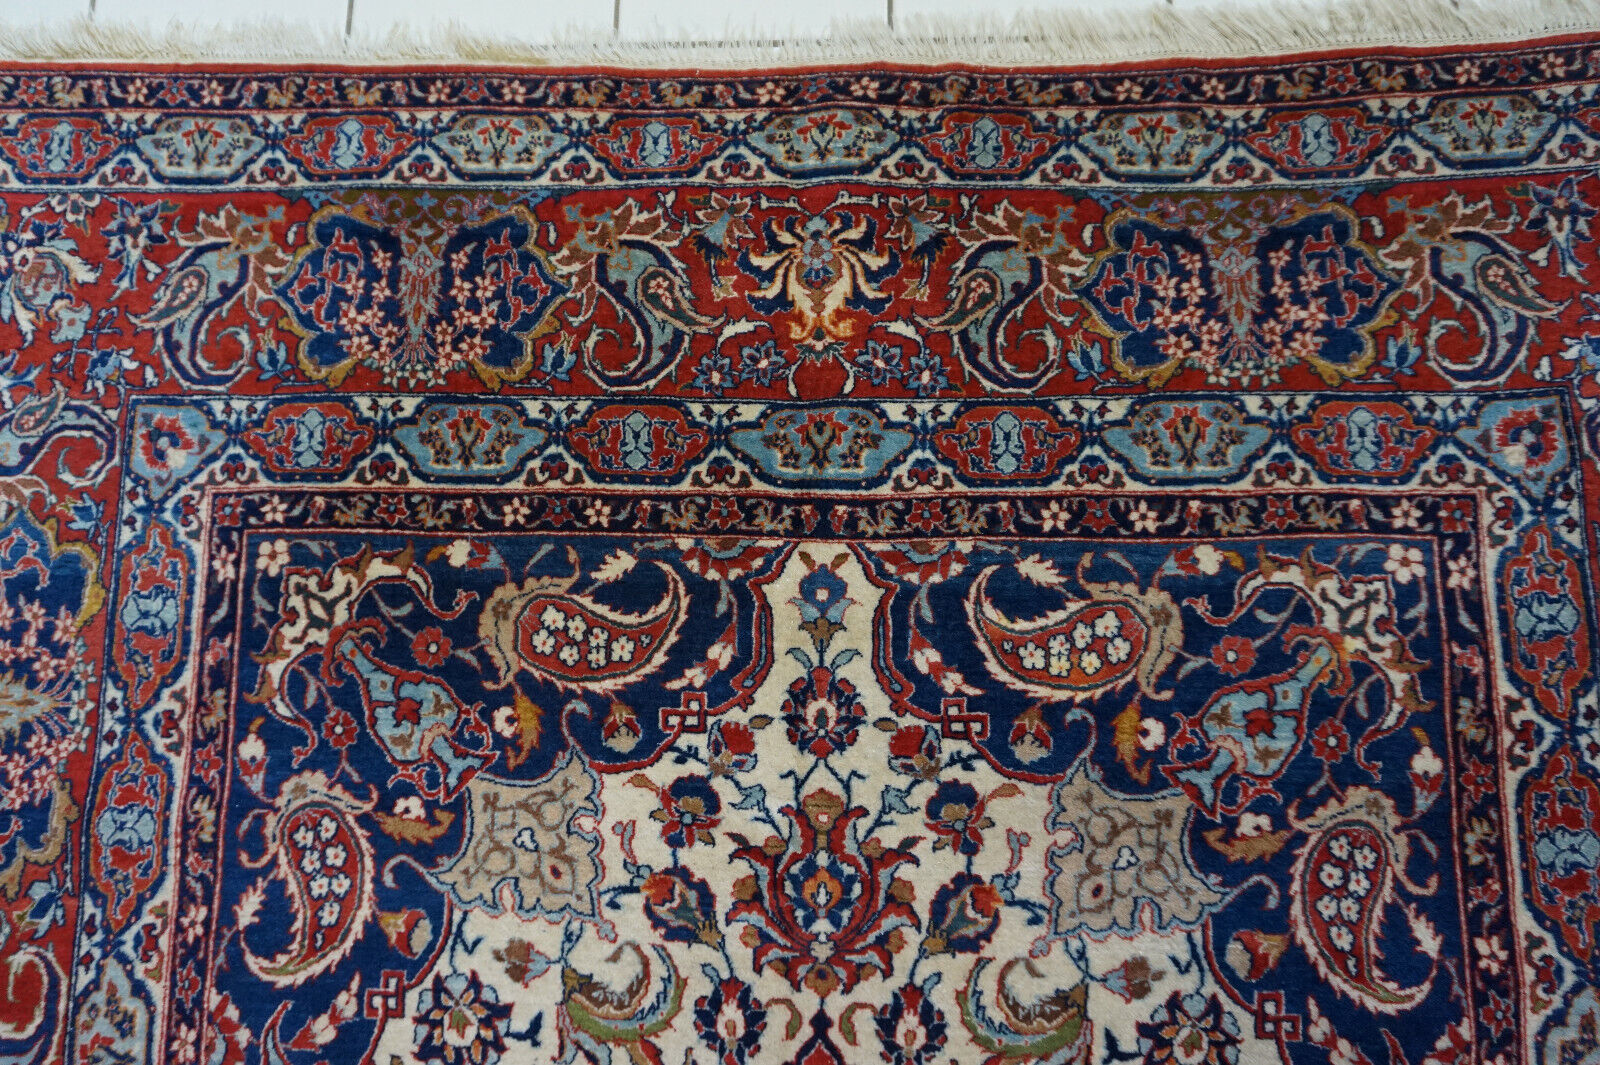 Detailed shot of the high-quality wool material used in the Handmade Antique Persian Style Isfahan Rug